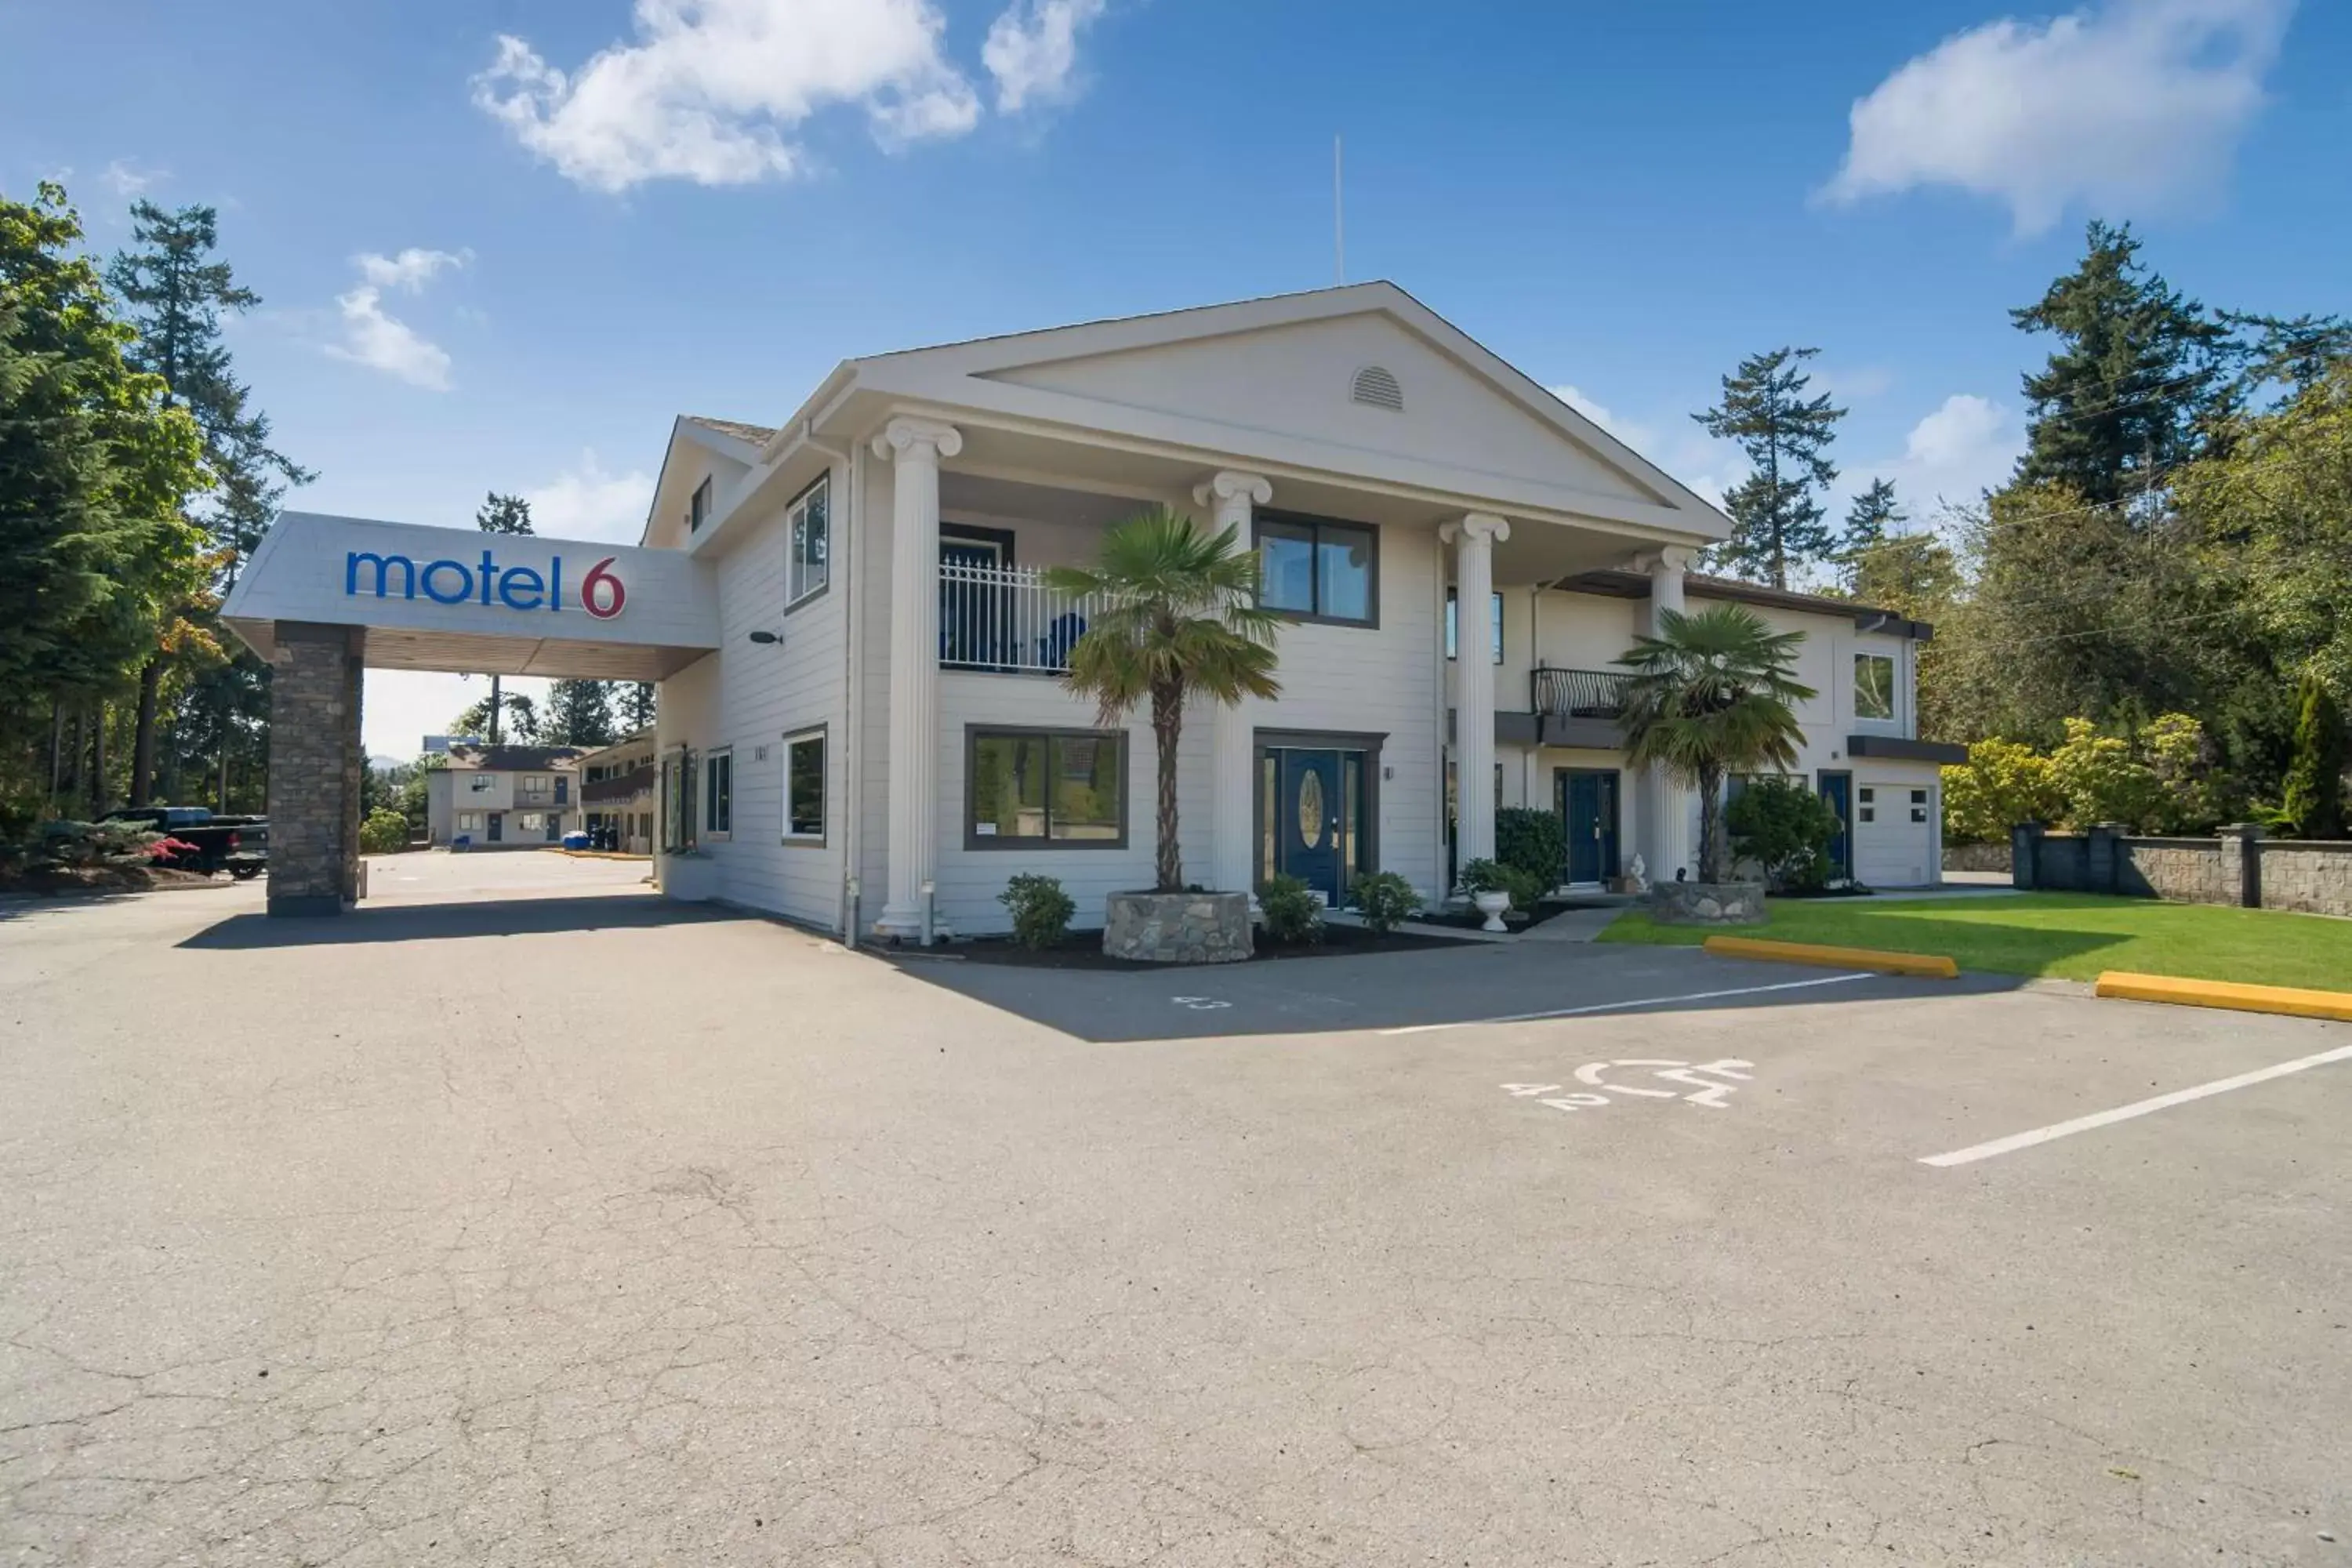 Property building in Motel 6-Saanichton, BC - Victoria Airport